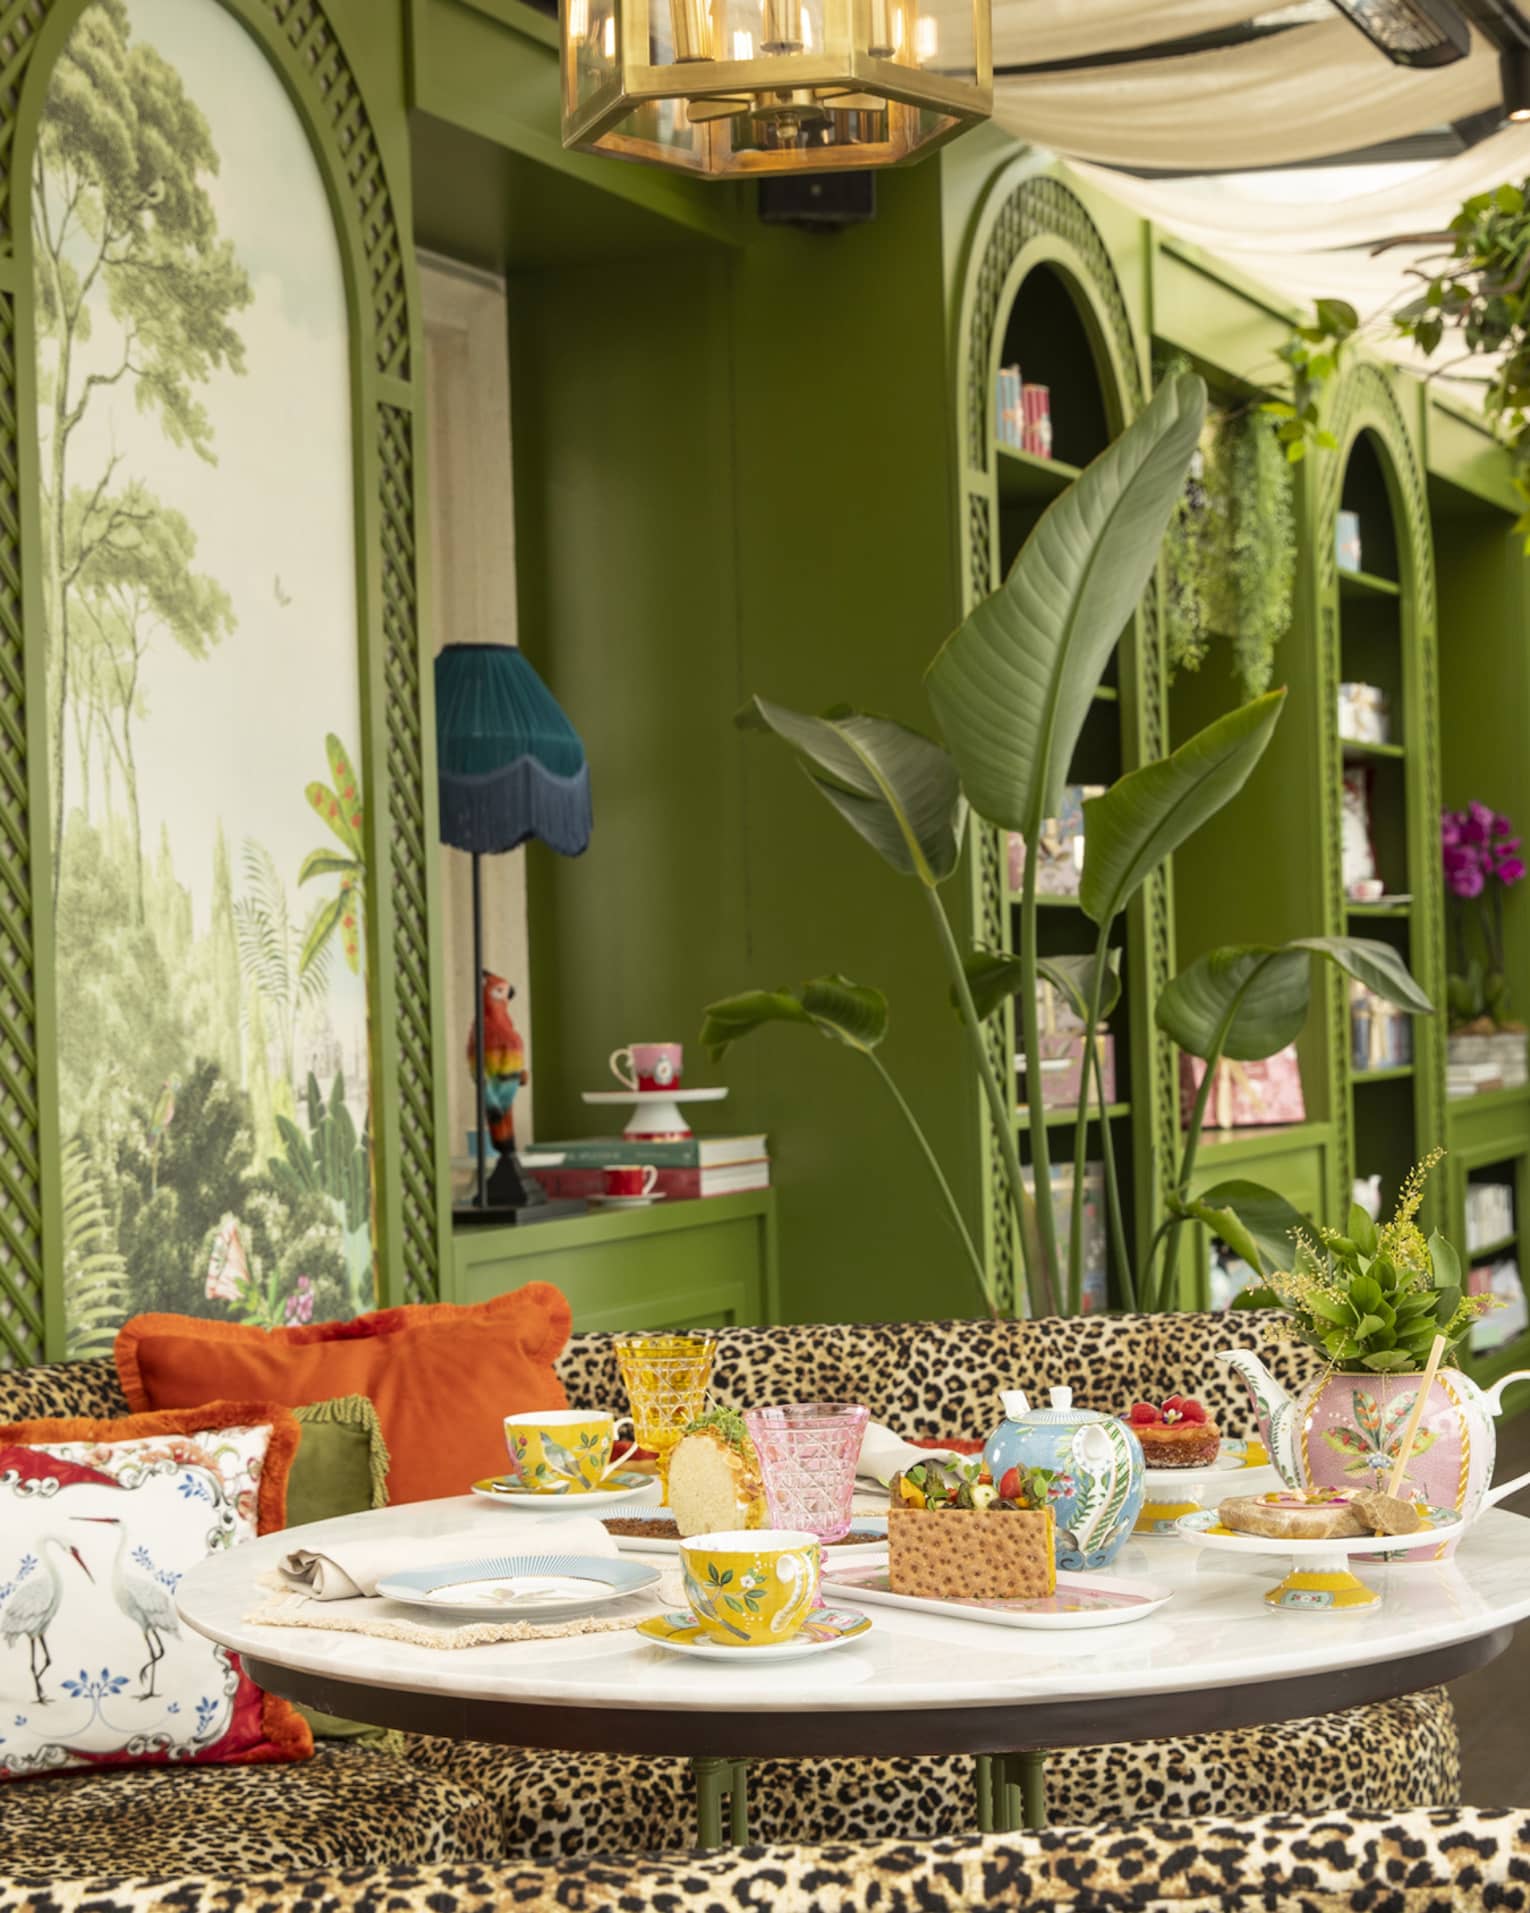 Gracebrands Patisserie setup by curved leopard-print couch topped with orange pillows and green walls in backdrop